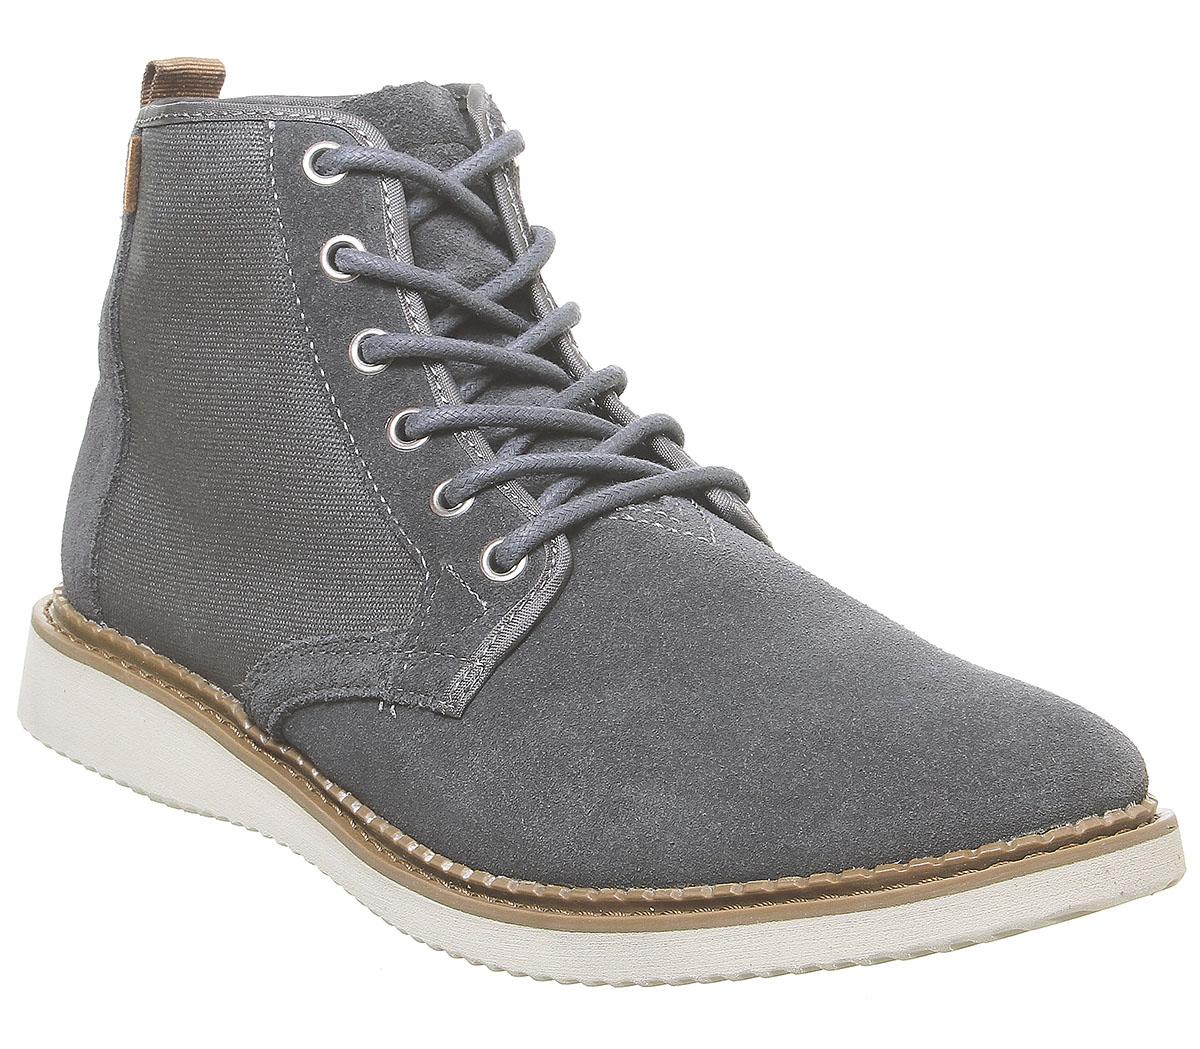 Toms Porter Boots Grey - Boots